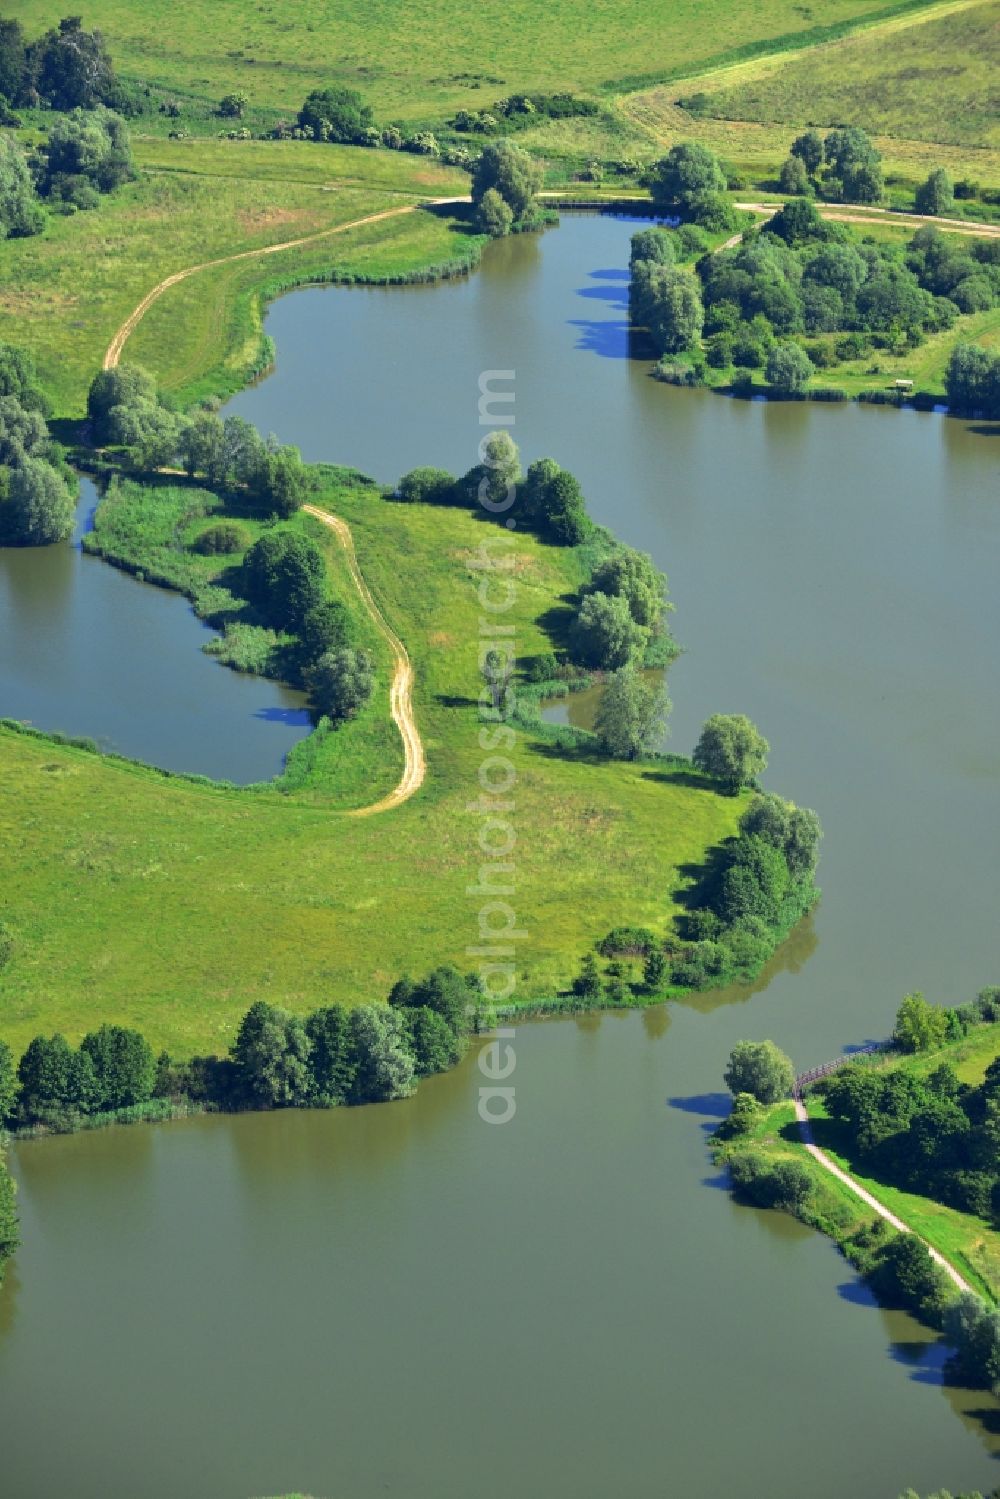 Aerial image Oberkrämer - View of the Mühlen lake in the local district Vehlefanz of the municipality Oberkrämer in Brandenburg. The lake was created by the LPG to be used as a water reservoir to irrigate the surrounding fields. To this day, the lake is still used for that